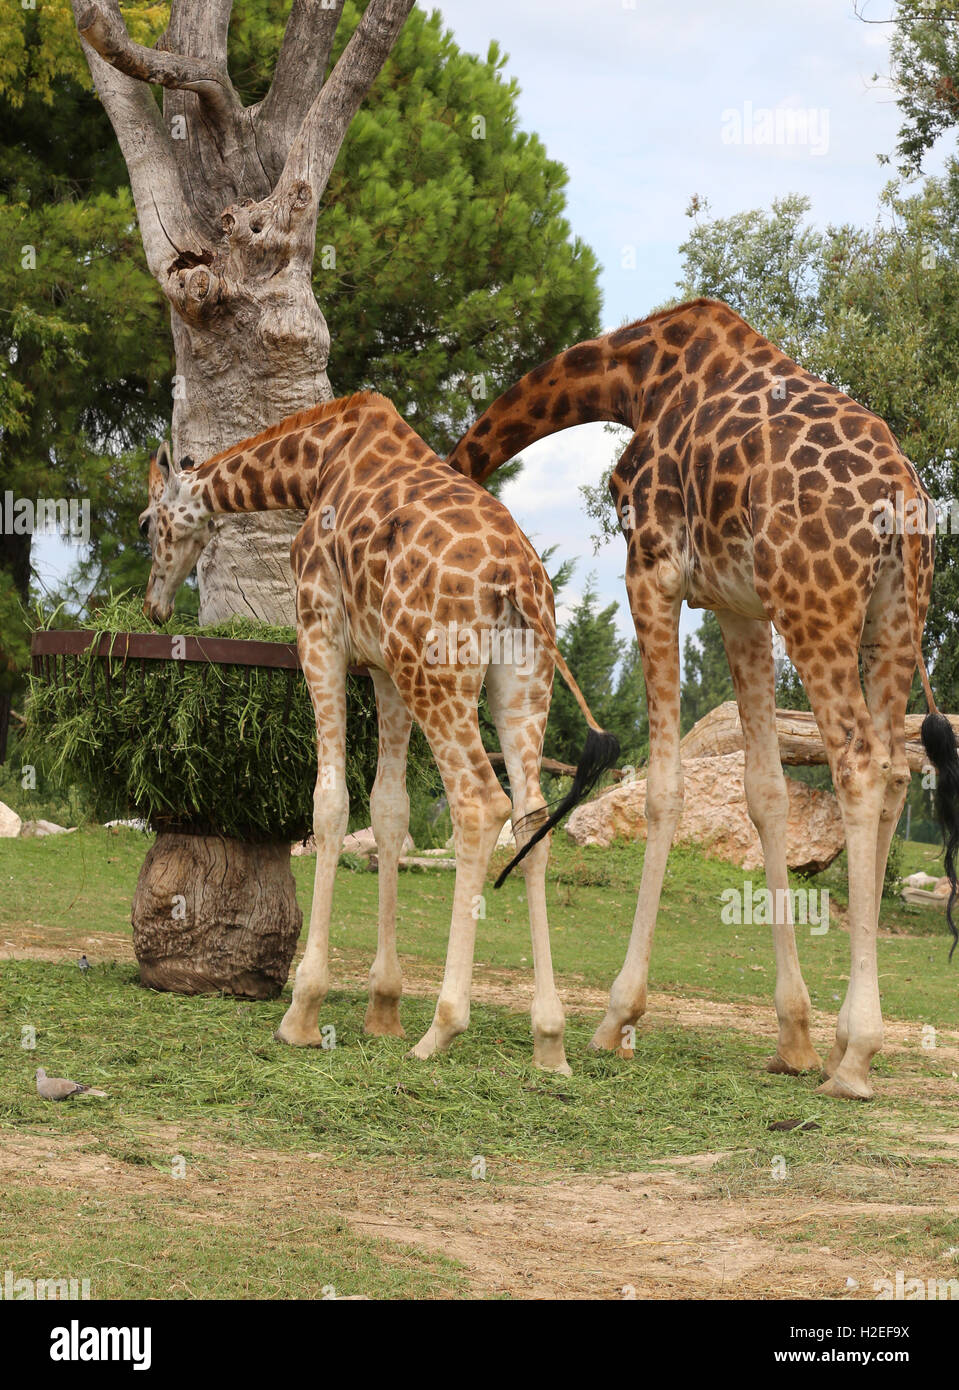 two African Giraffes with long neck eats the leaves Stock Photo